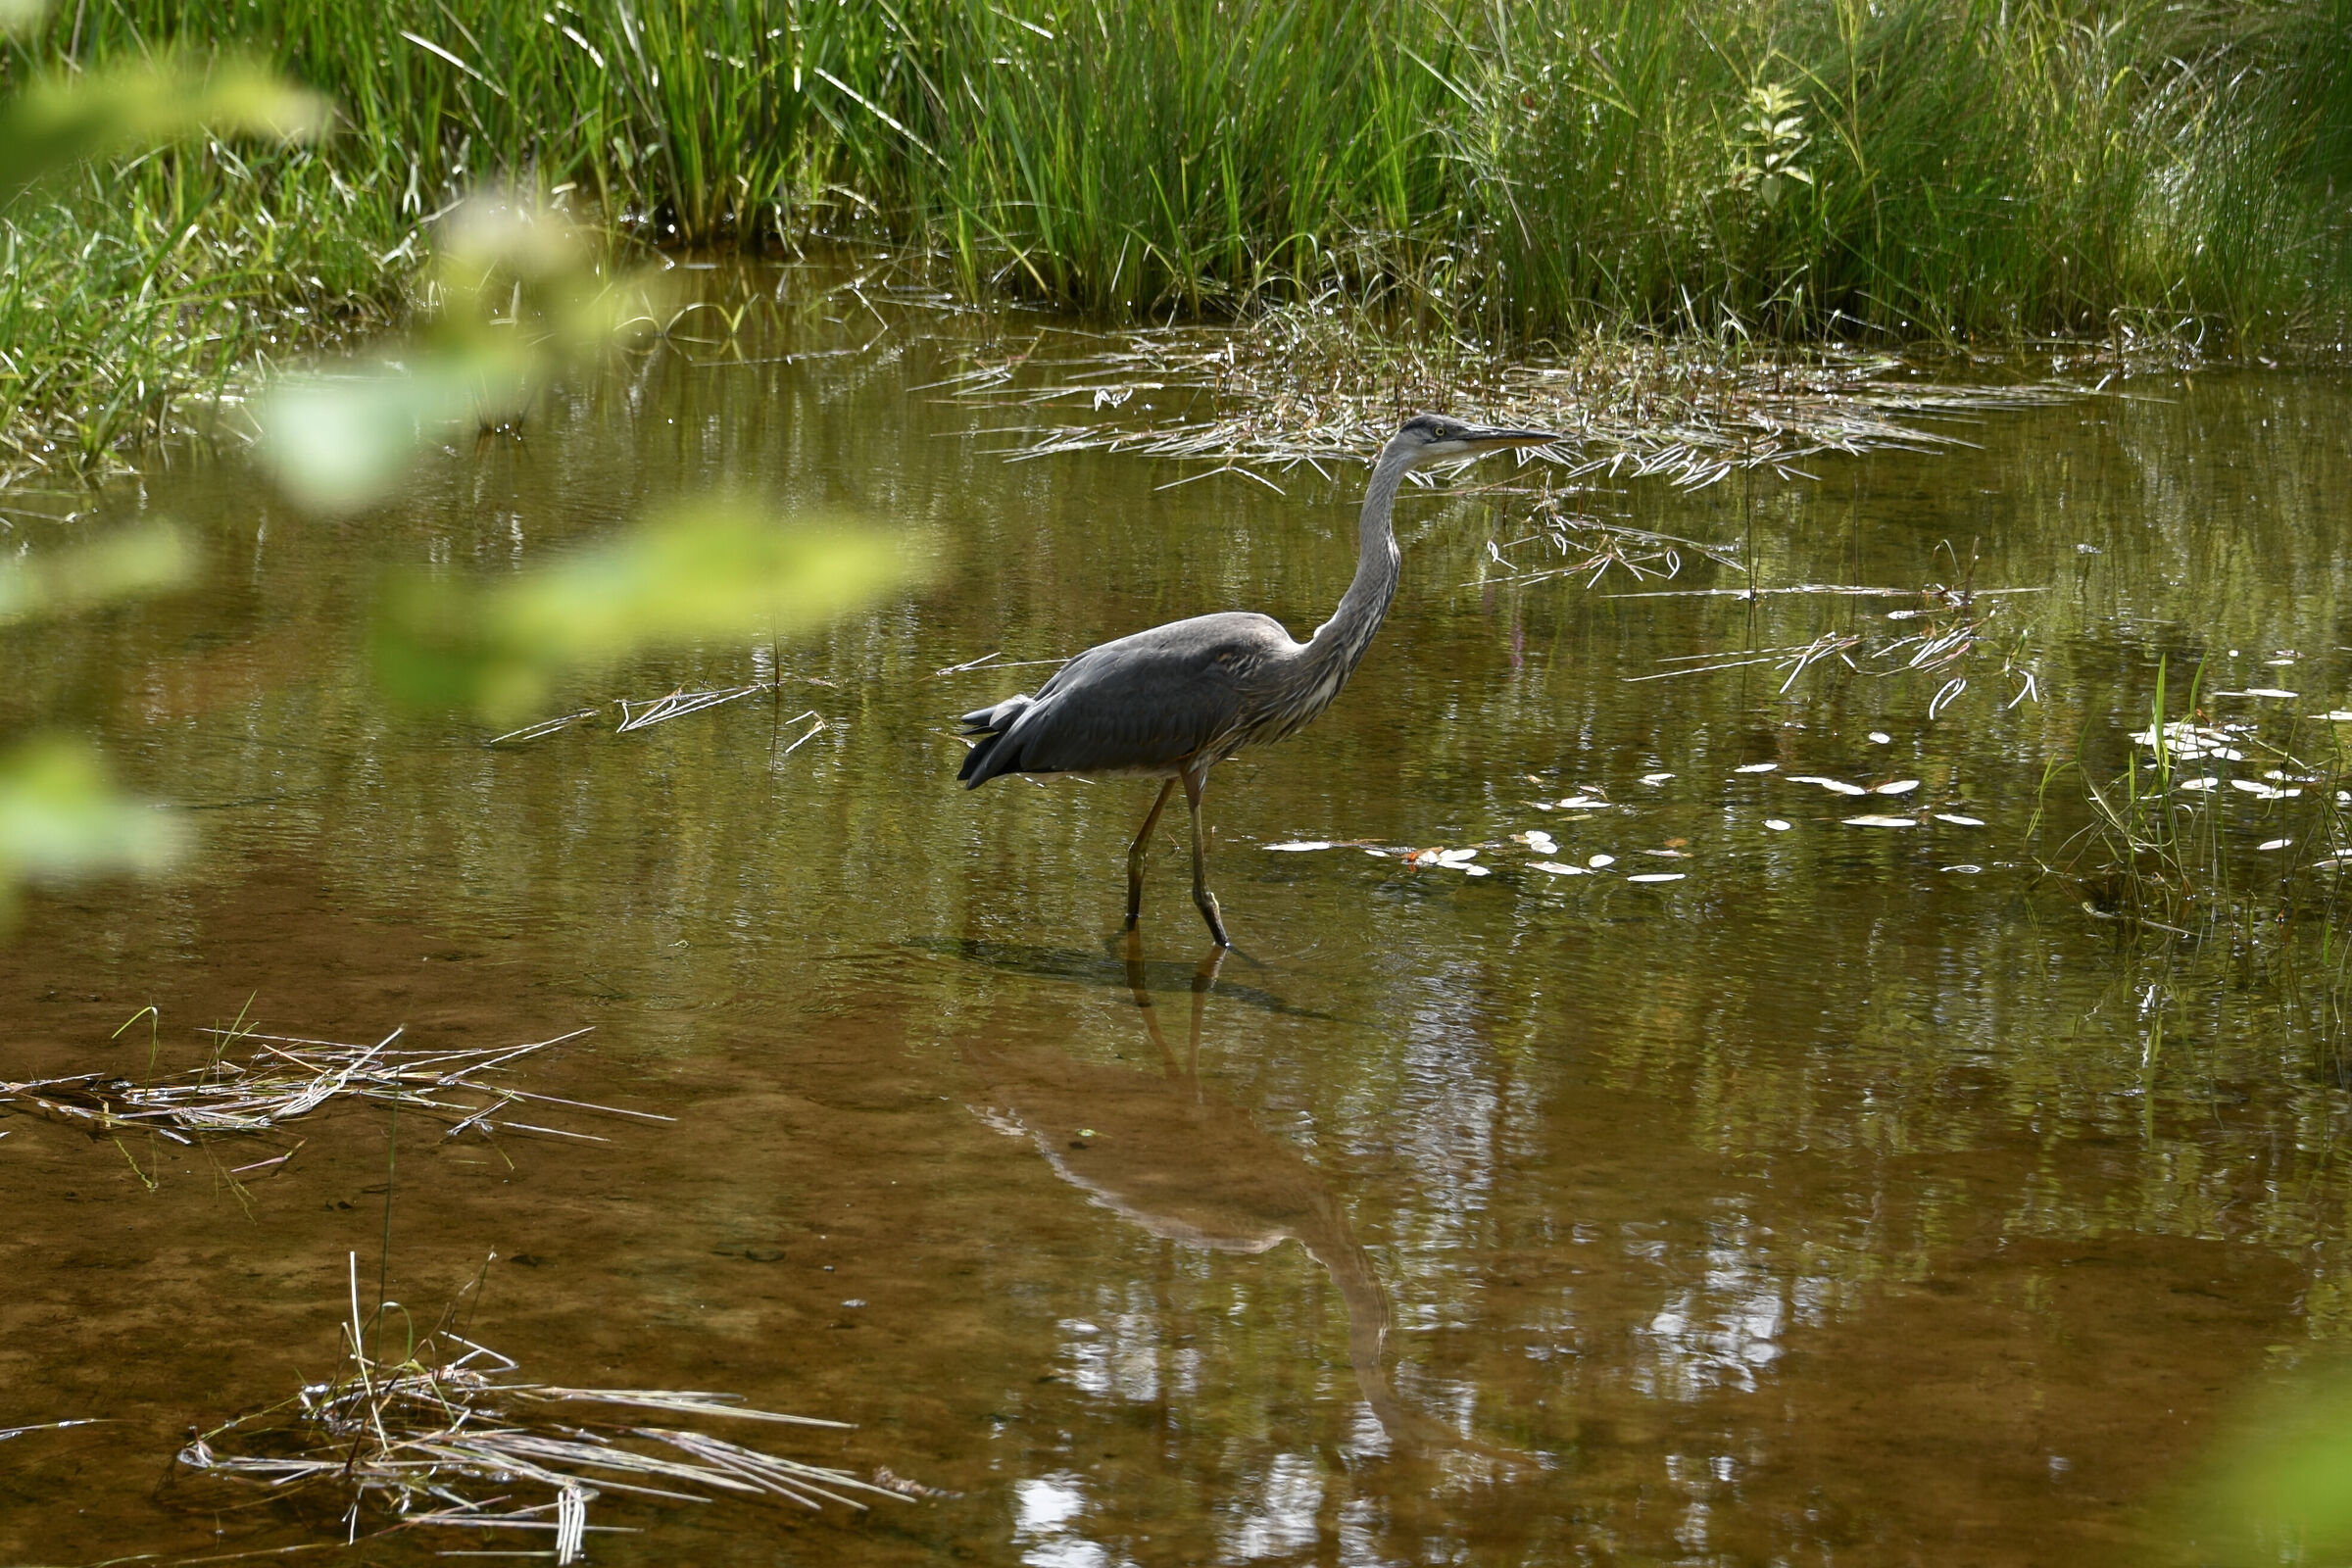 In an undergrowth, a magnificent Heron...